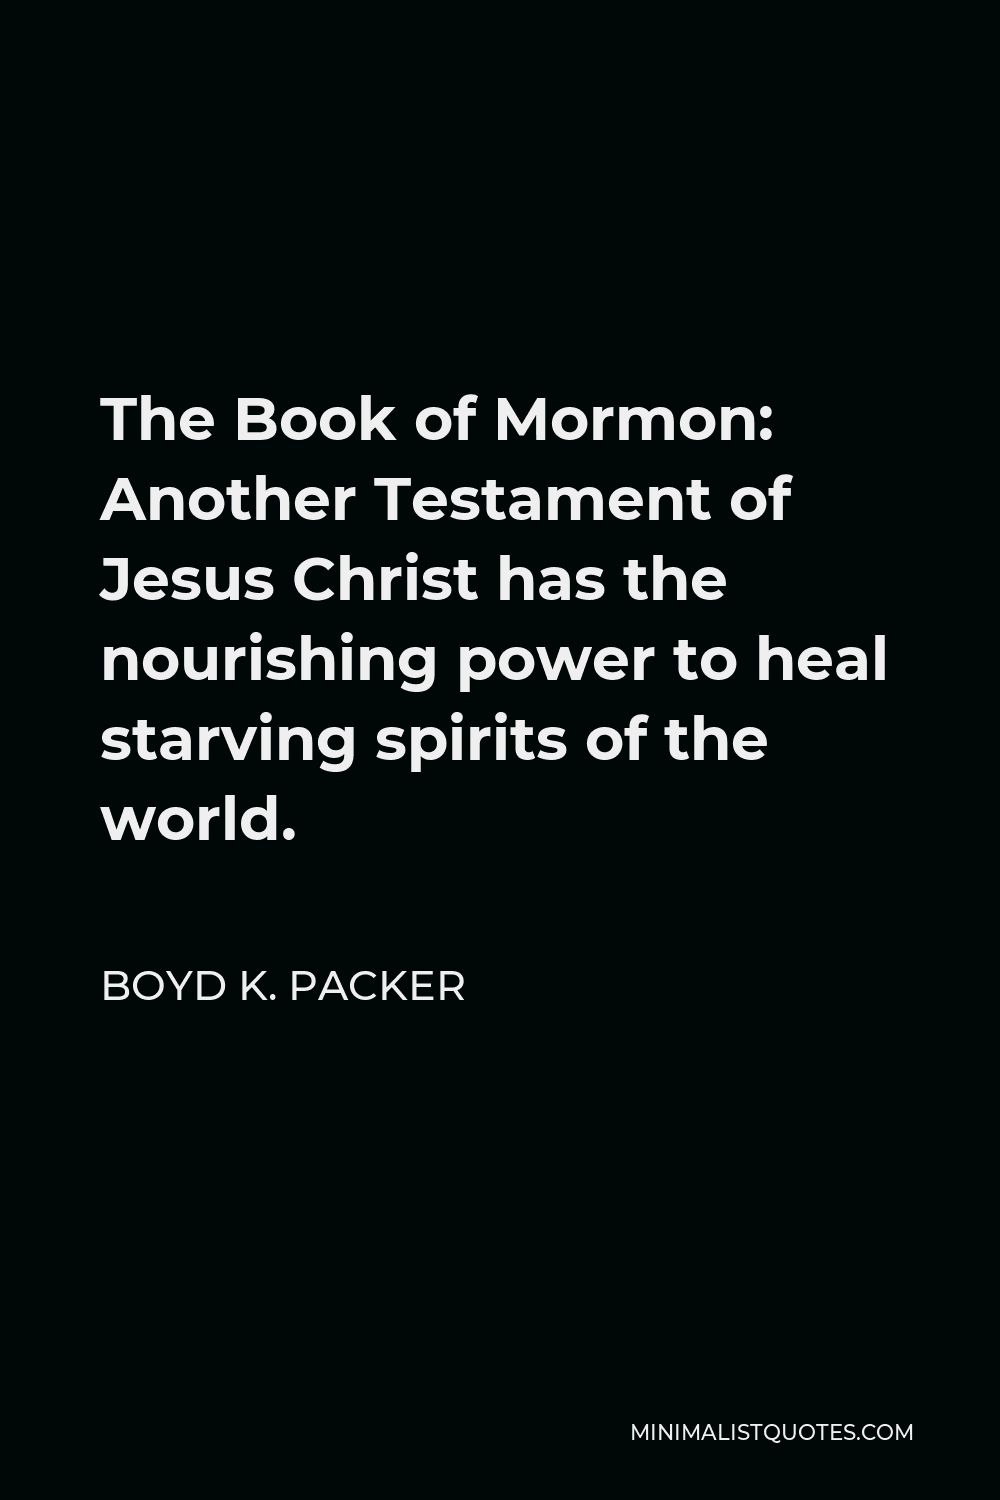 Boyd K. Packer Quote - The Book of Mormon: Another Testament of Jesus Christ has the nourishing power to heal starving spirits of the world.